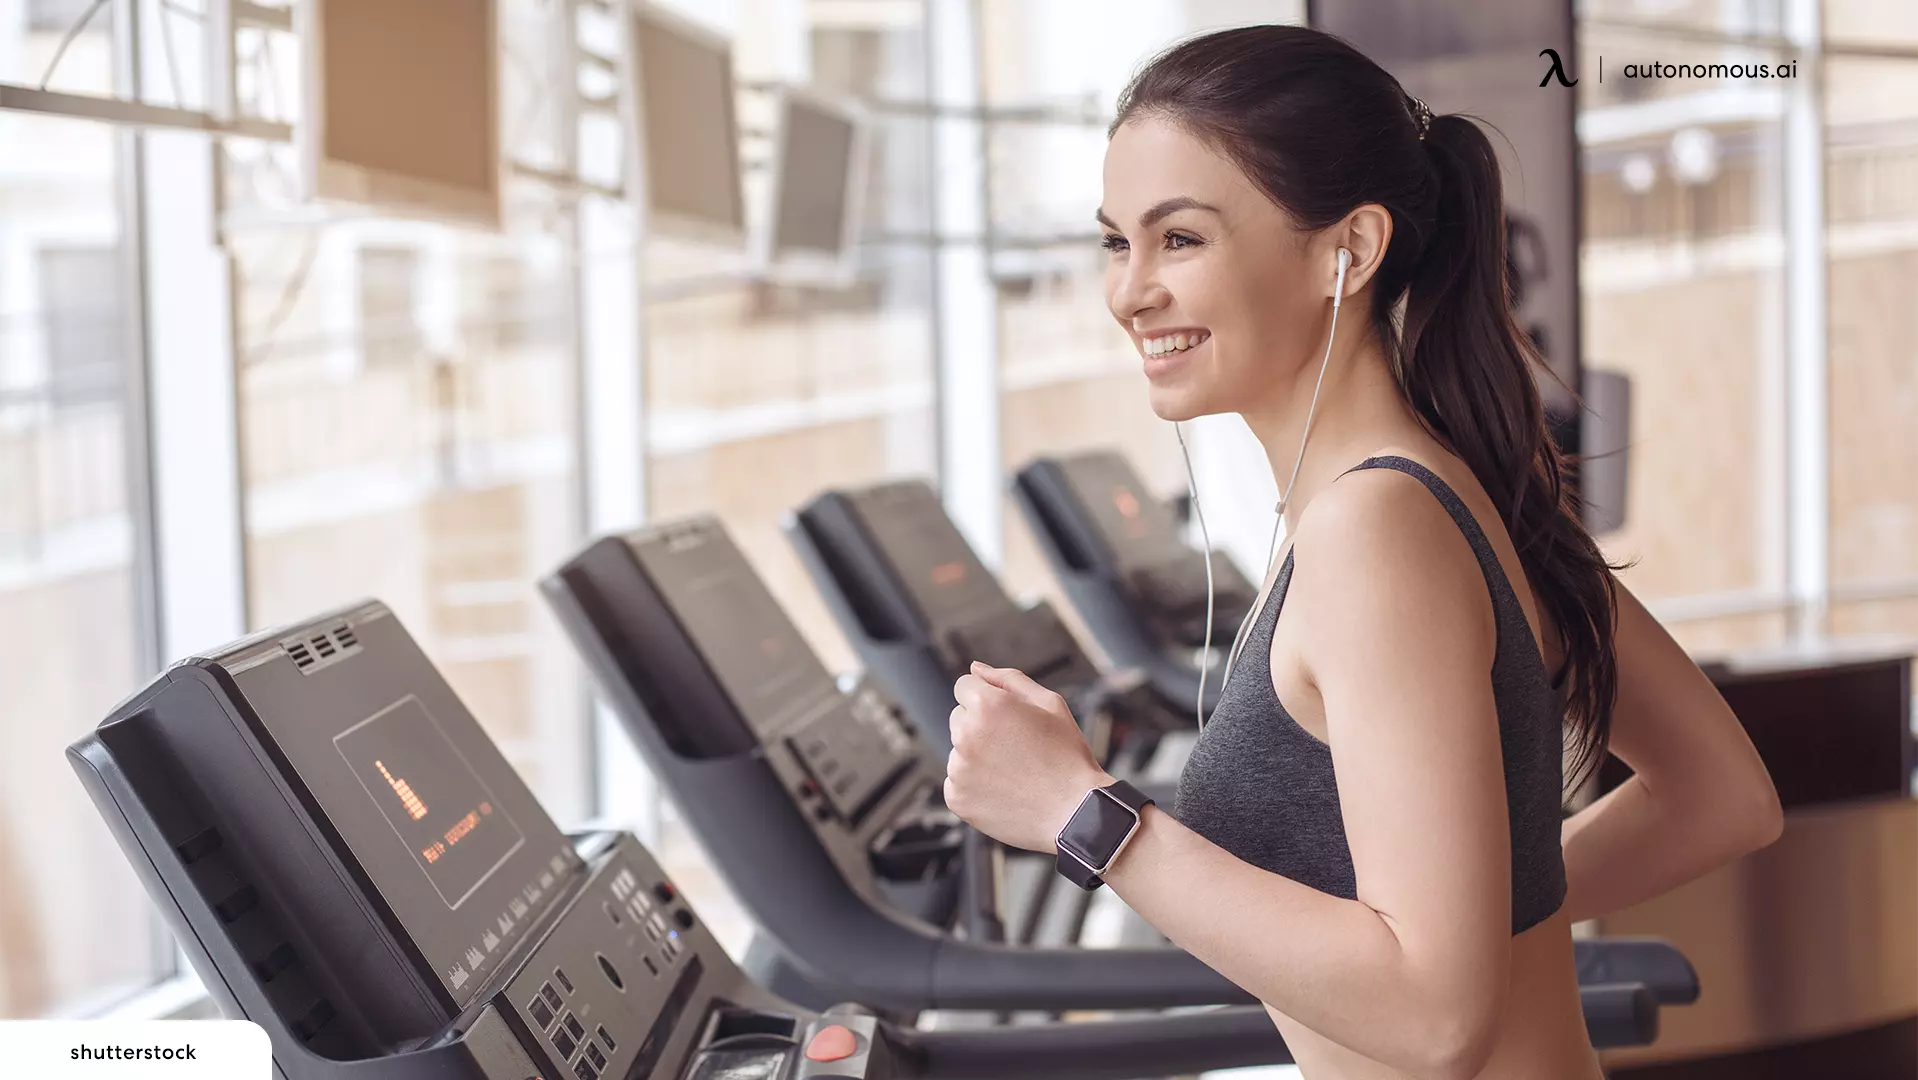 How Often to Do the 12-3-30 Treadmill Workout?